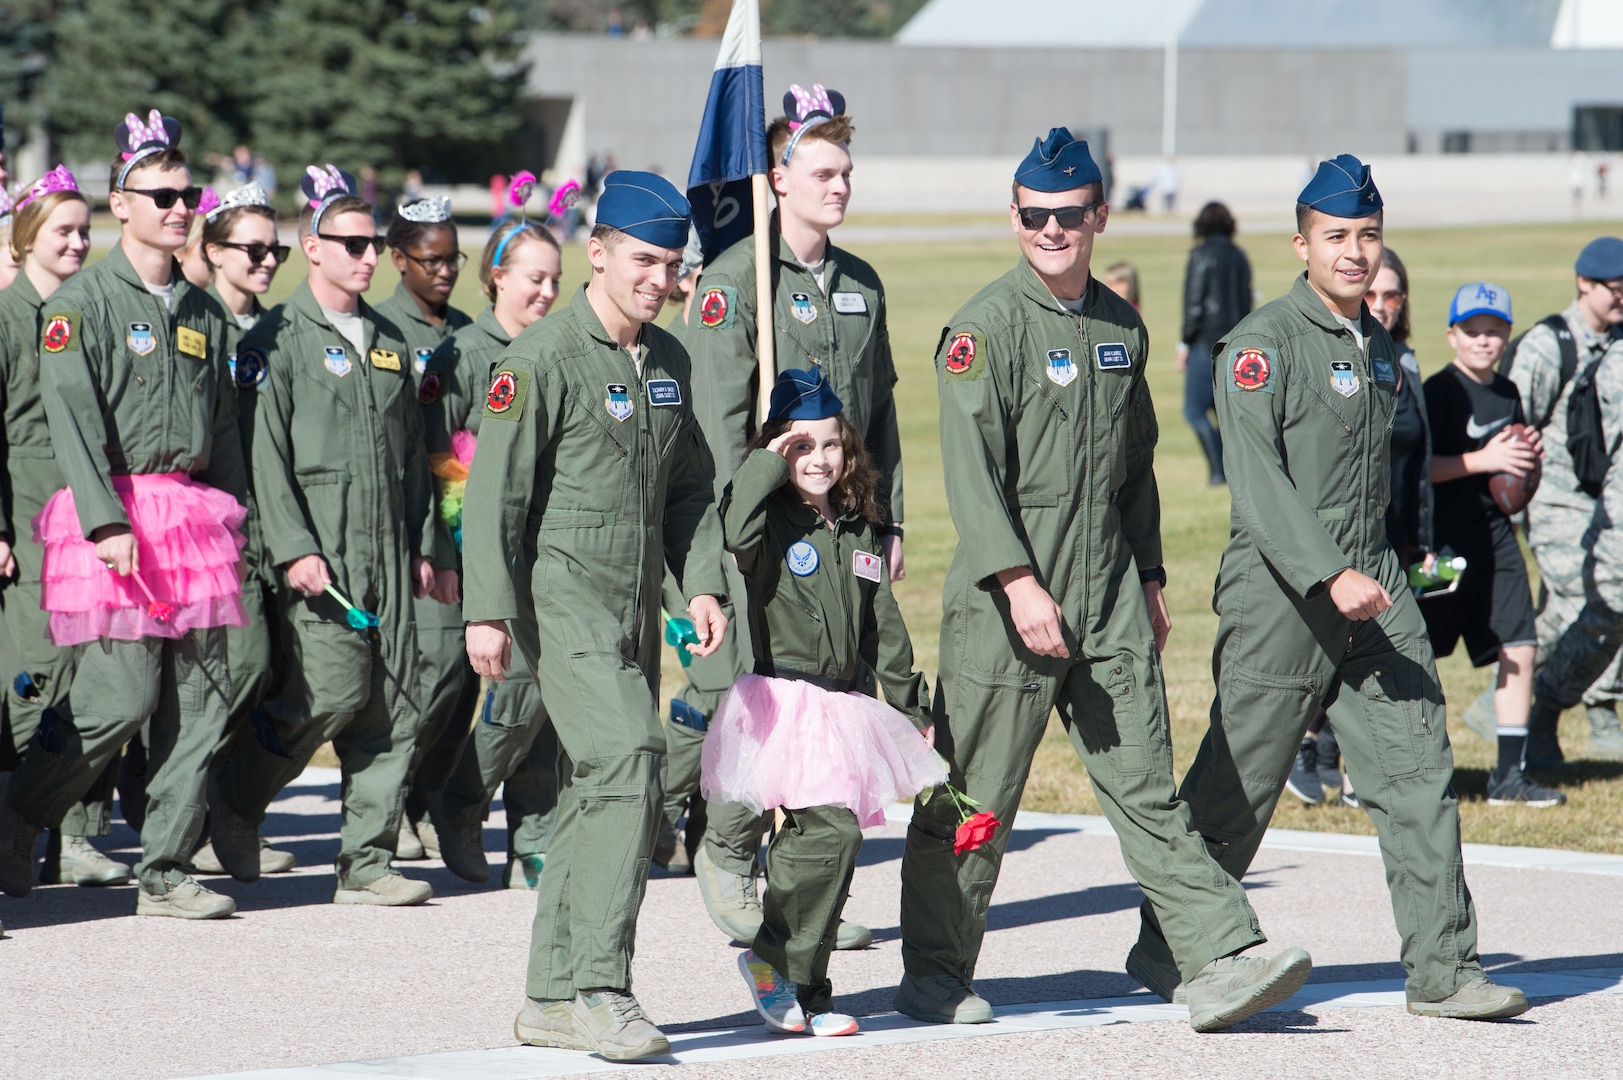 A little girl in a flight suit and pink tutu marches in an outdoor formation with cadets also in flight suits.